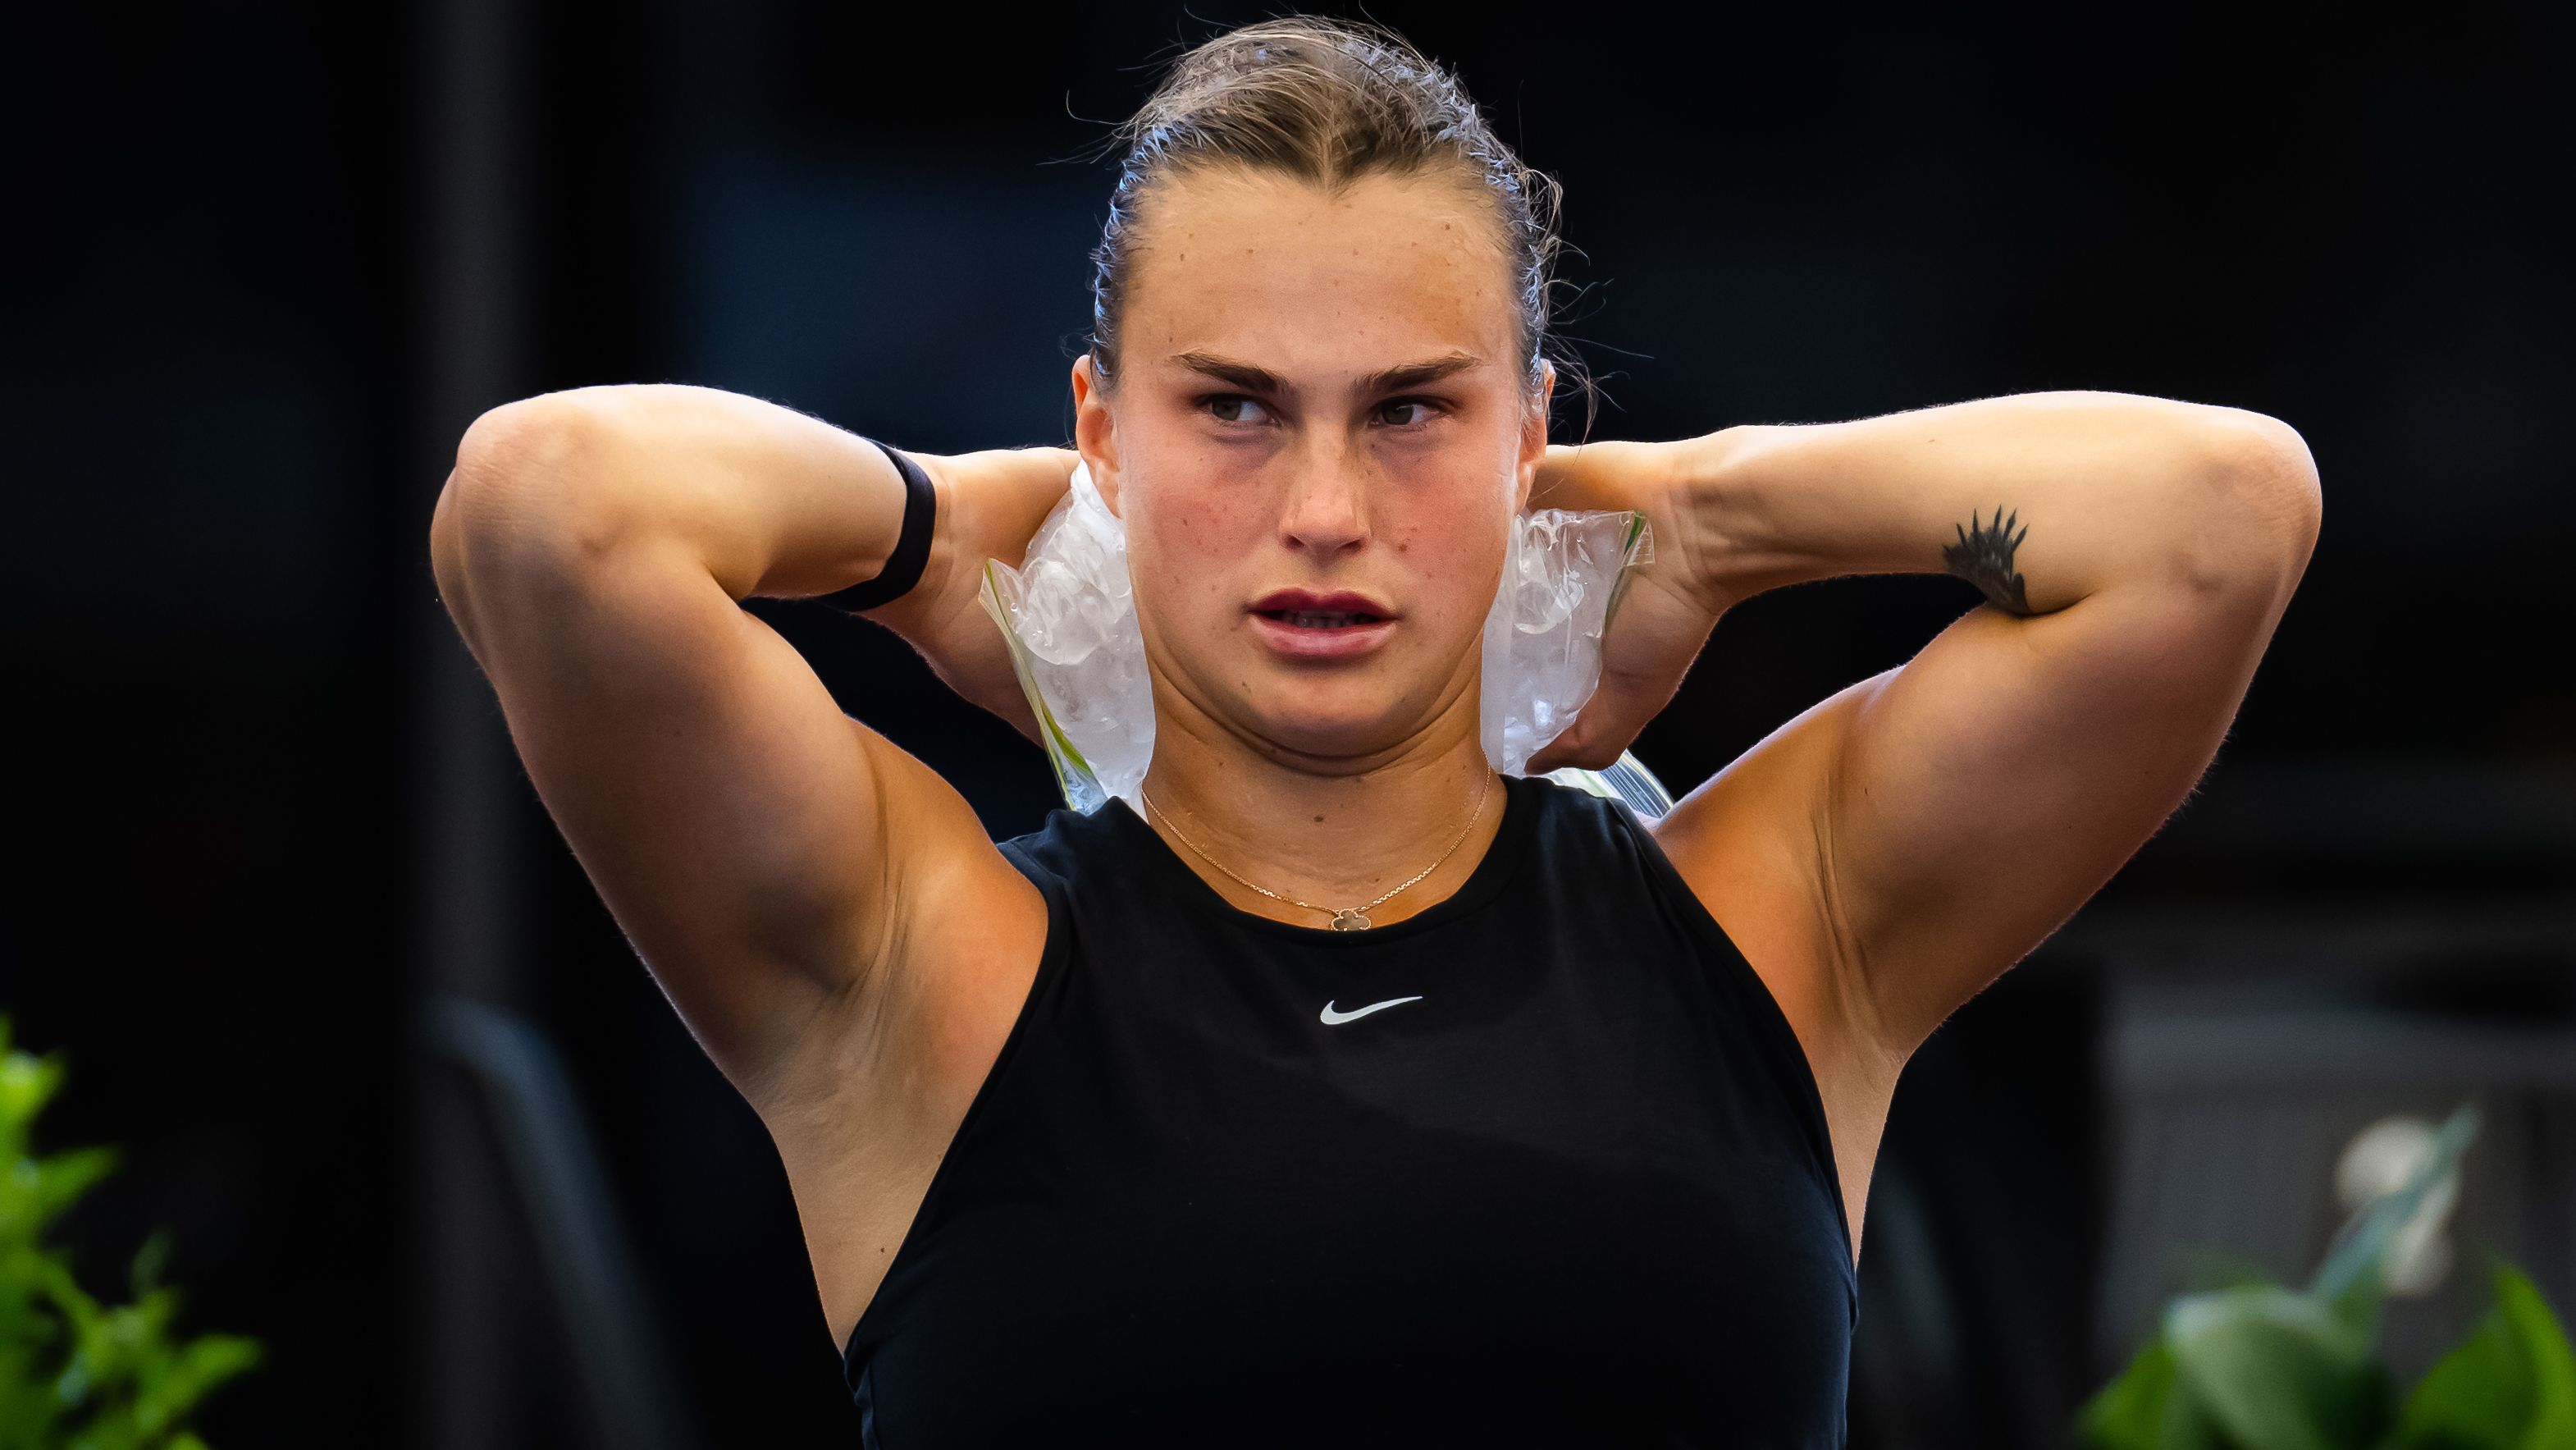 ADELAIDE, AUSTRALIA - JANUARY 07: Aryna Sabalenka of Belarus cools herself with ice packs during a change-over while playing against Irina-Camelia Begu of Romania in the semi-final on Day 7 of the 2023 Adelaide International at Memorial Drive on January 07, 2023 in Adelaide, Australia (Photo by Robert Prange/Getty Images)